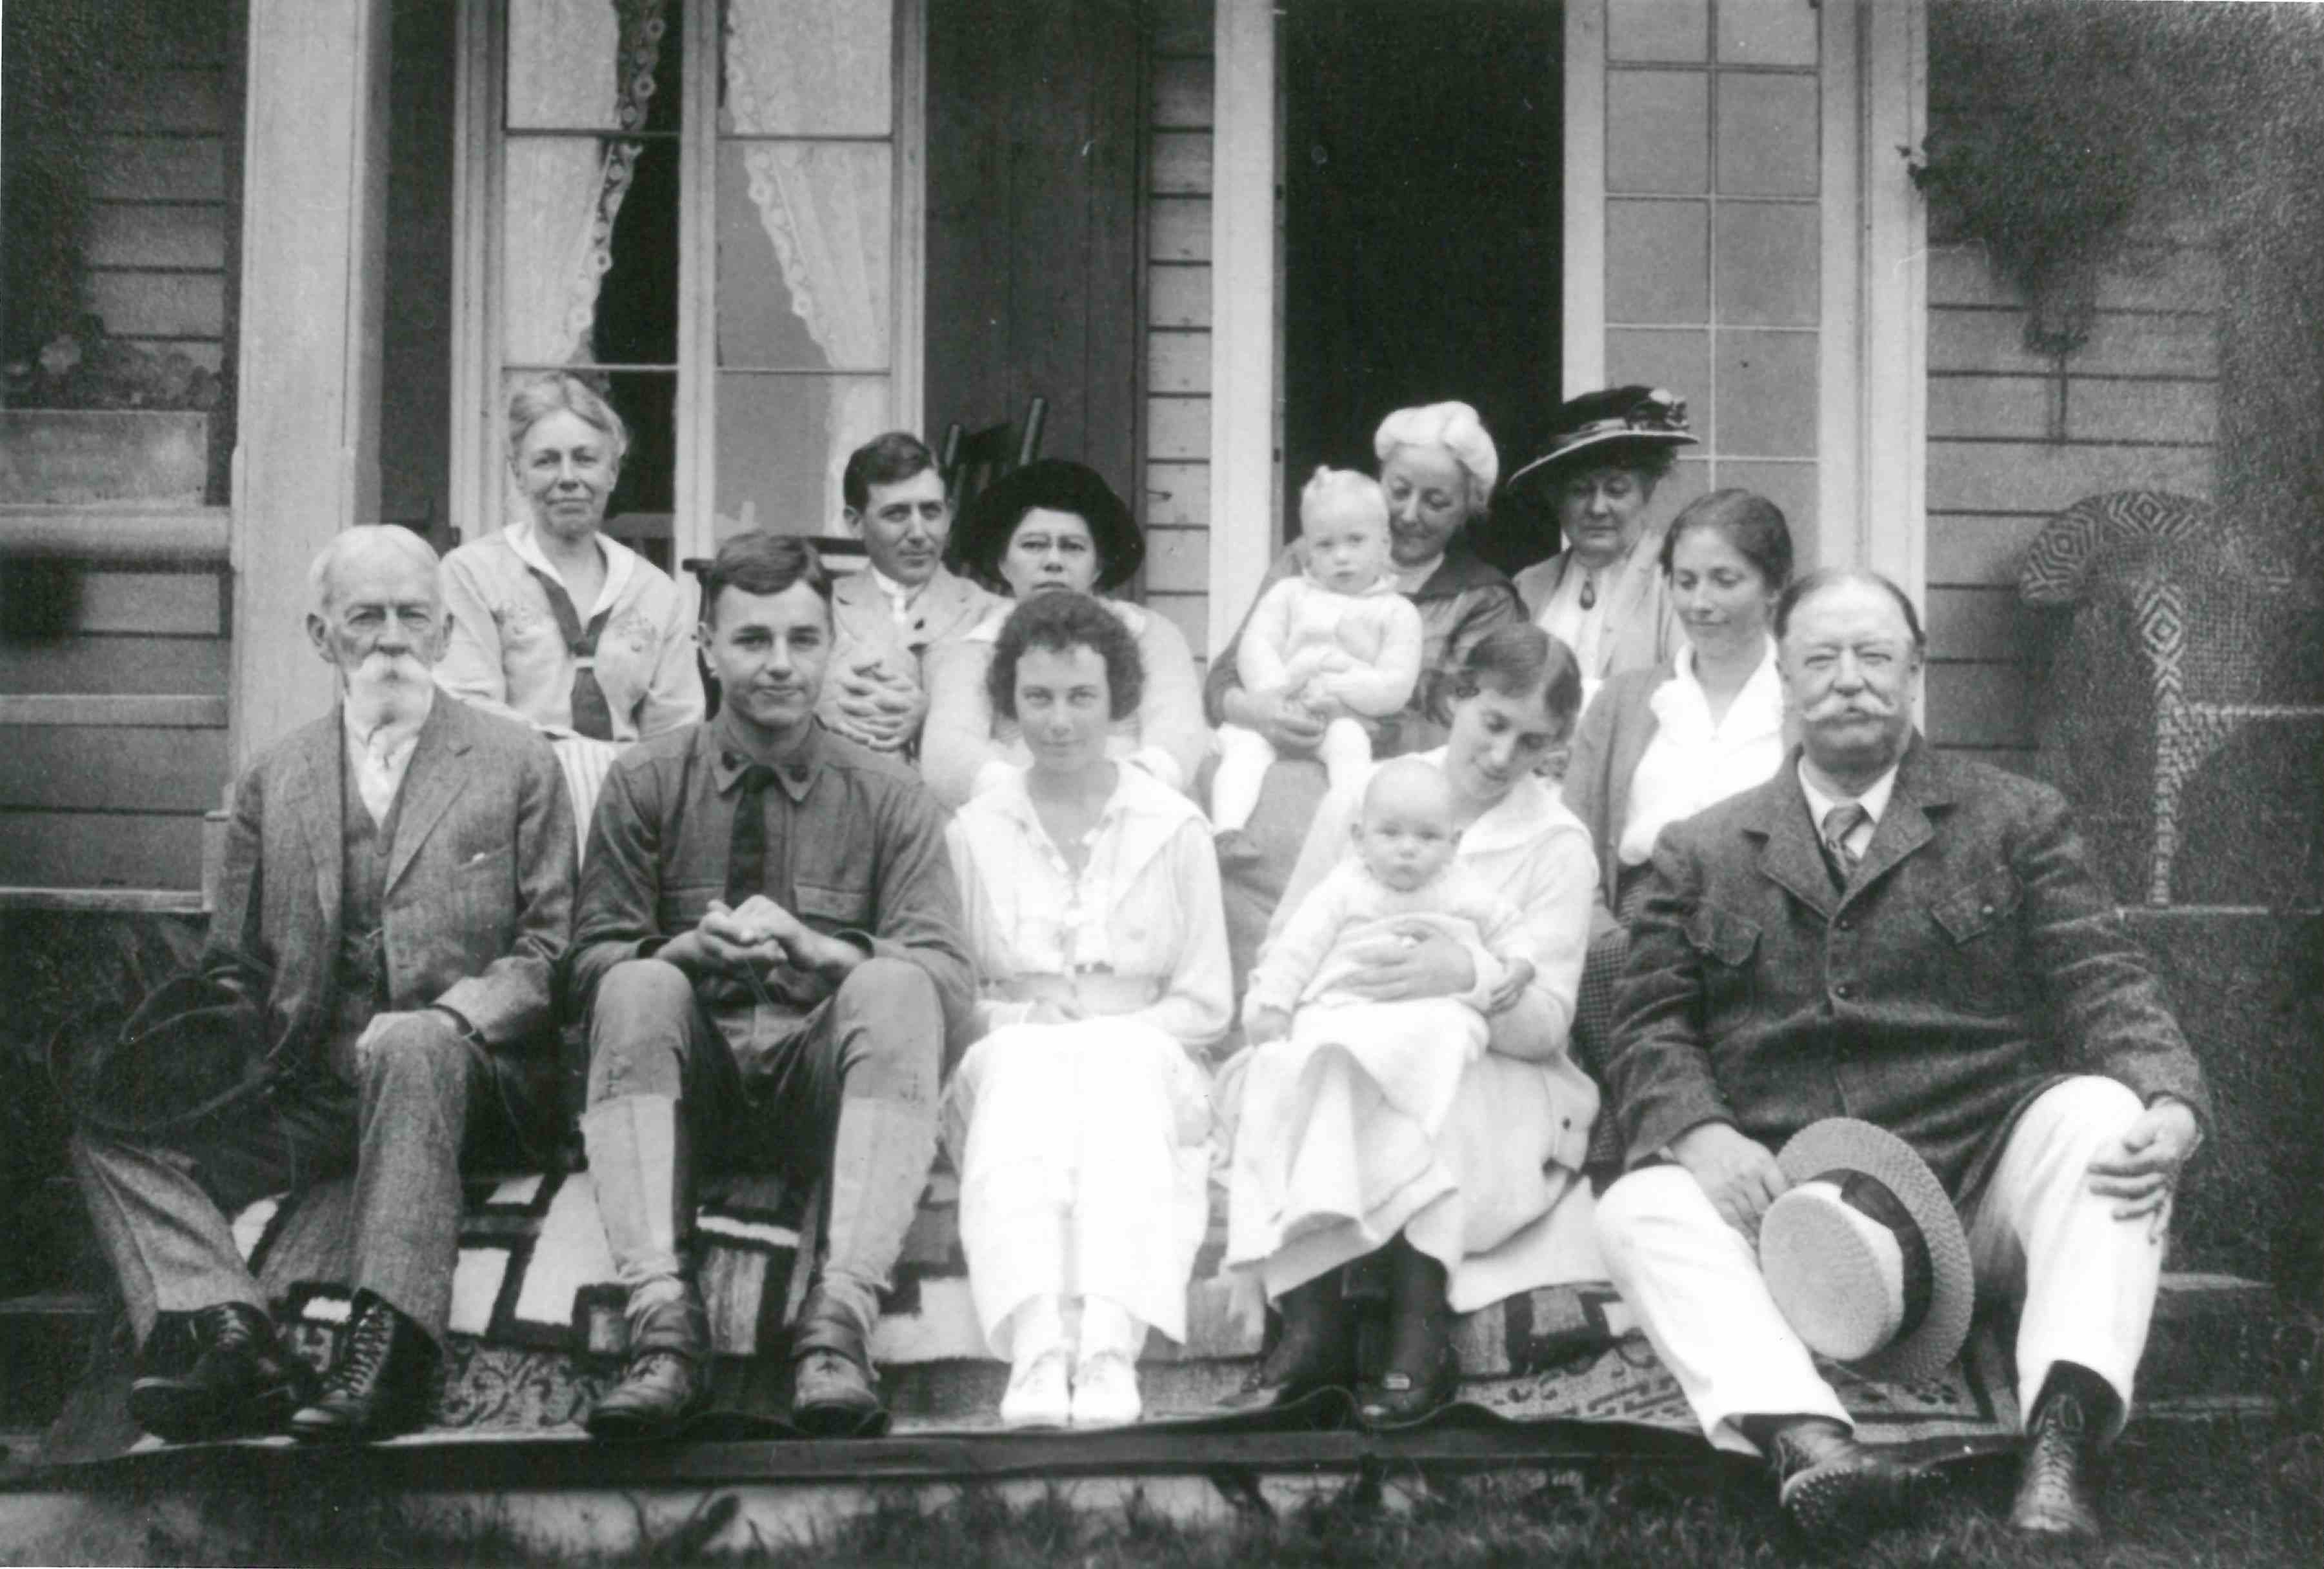 A dozen people of all ages posing for a family photograph on the steps of a summer home.